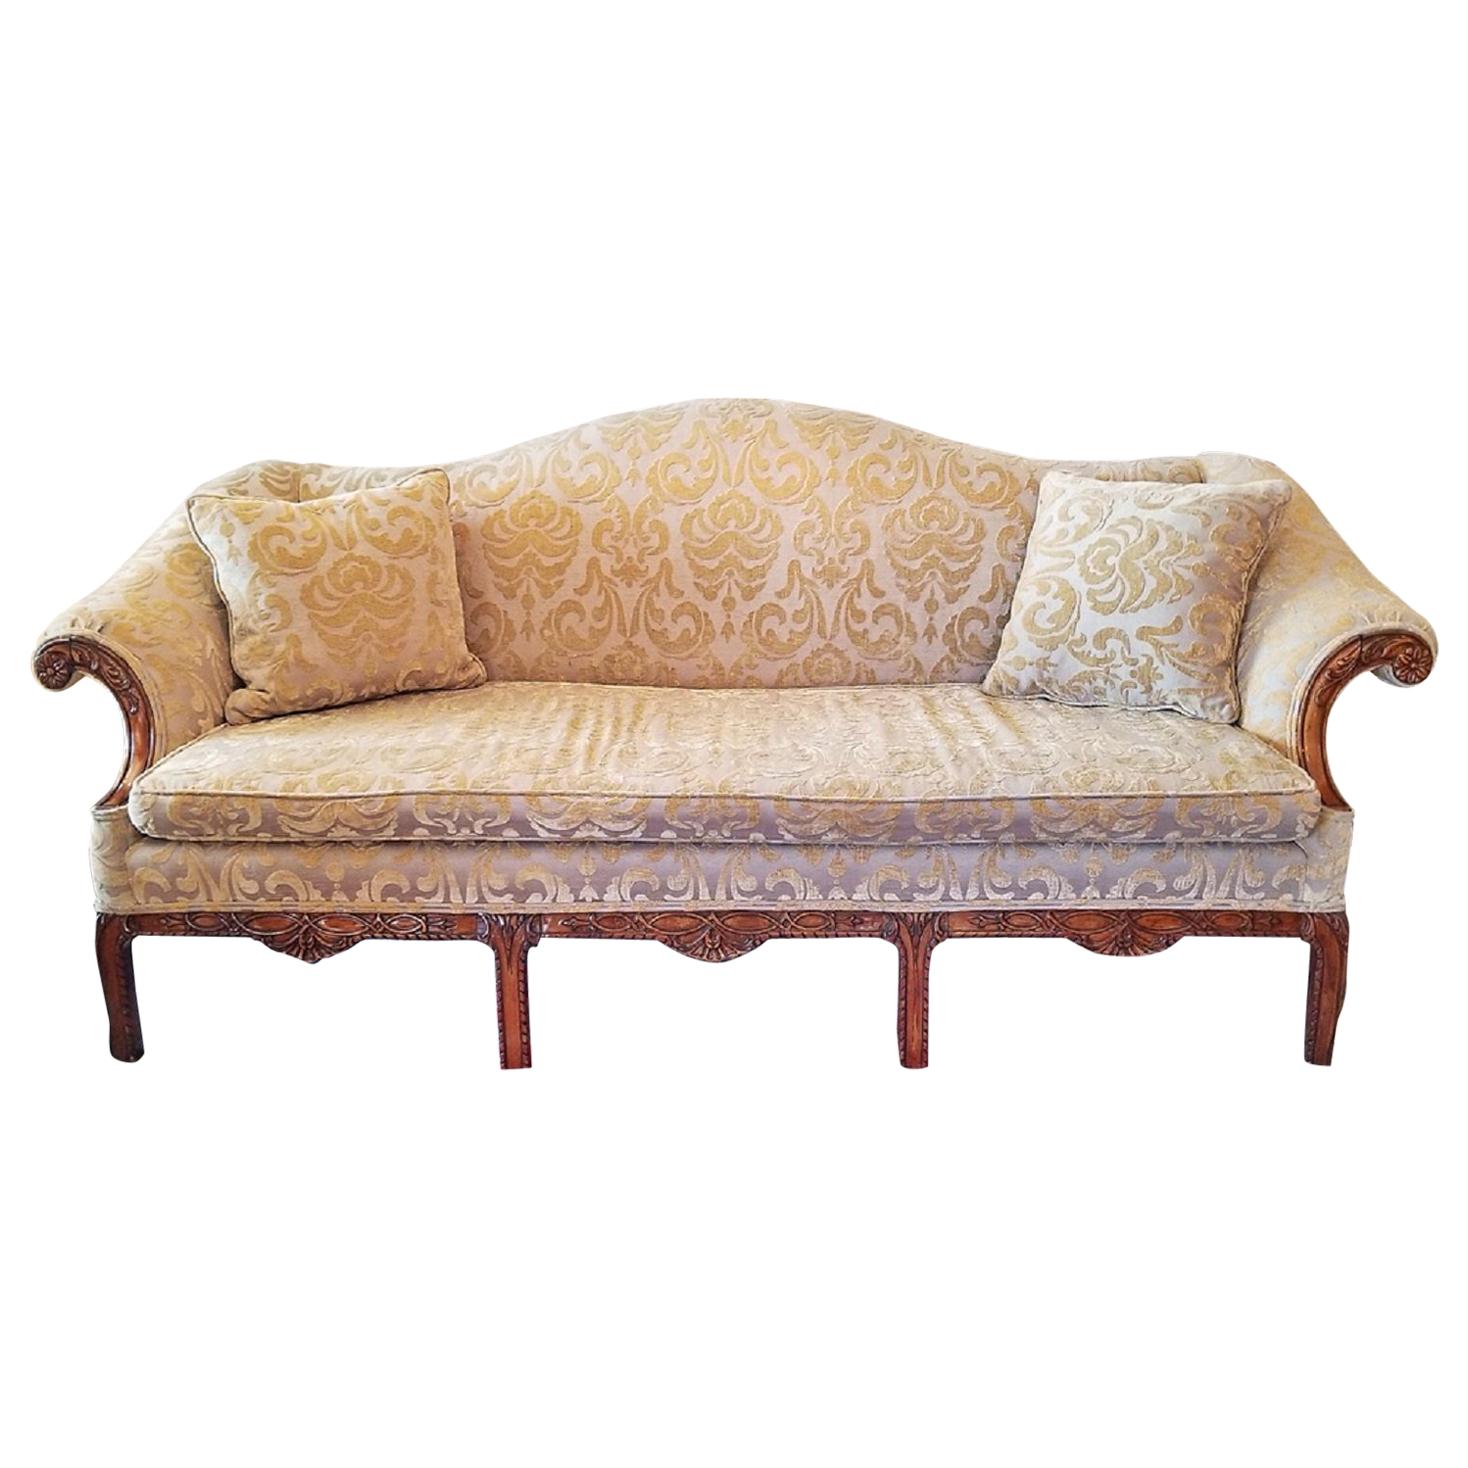 19th Century Chippendale Style Camel Back Sofa